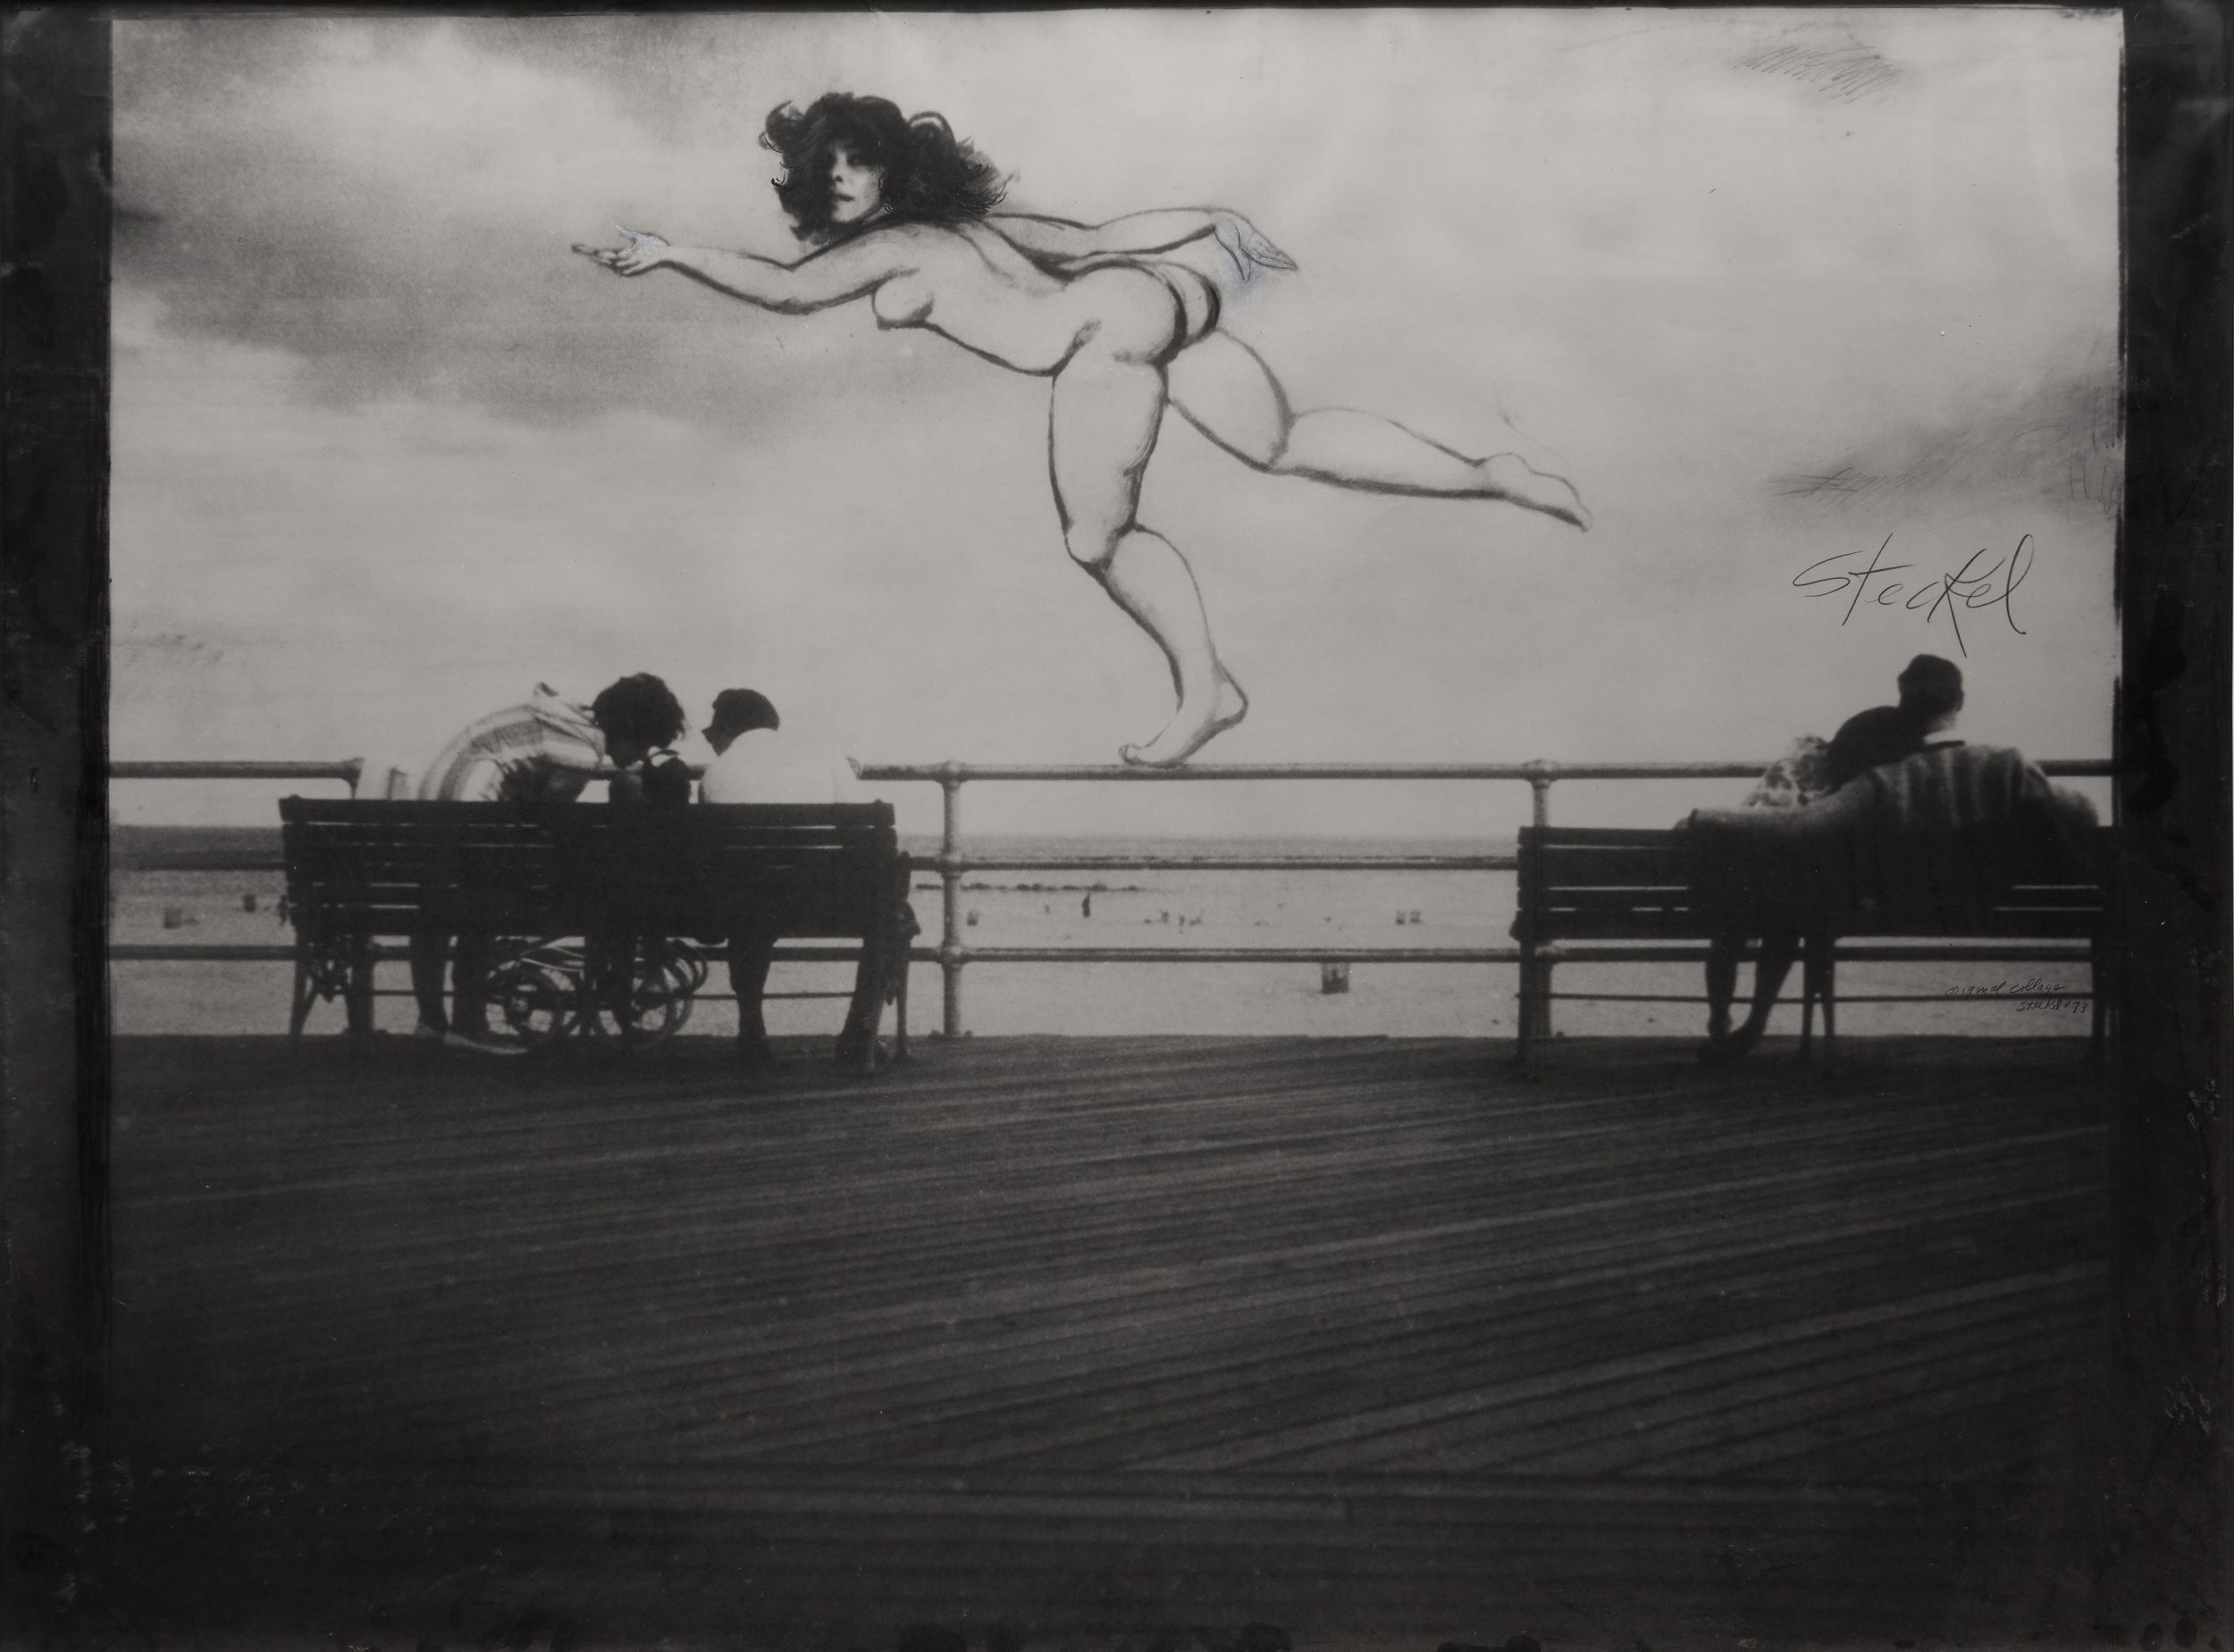 Collaged black-and-white photograph of figures sitting and reclining on park benches on a boardwalk in front of a body of water. Balancing on the barricade on one foot is a larger-than-life-size image of a nude woman in an arabesque